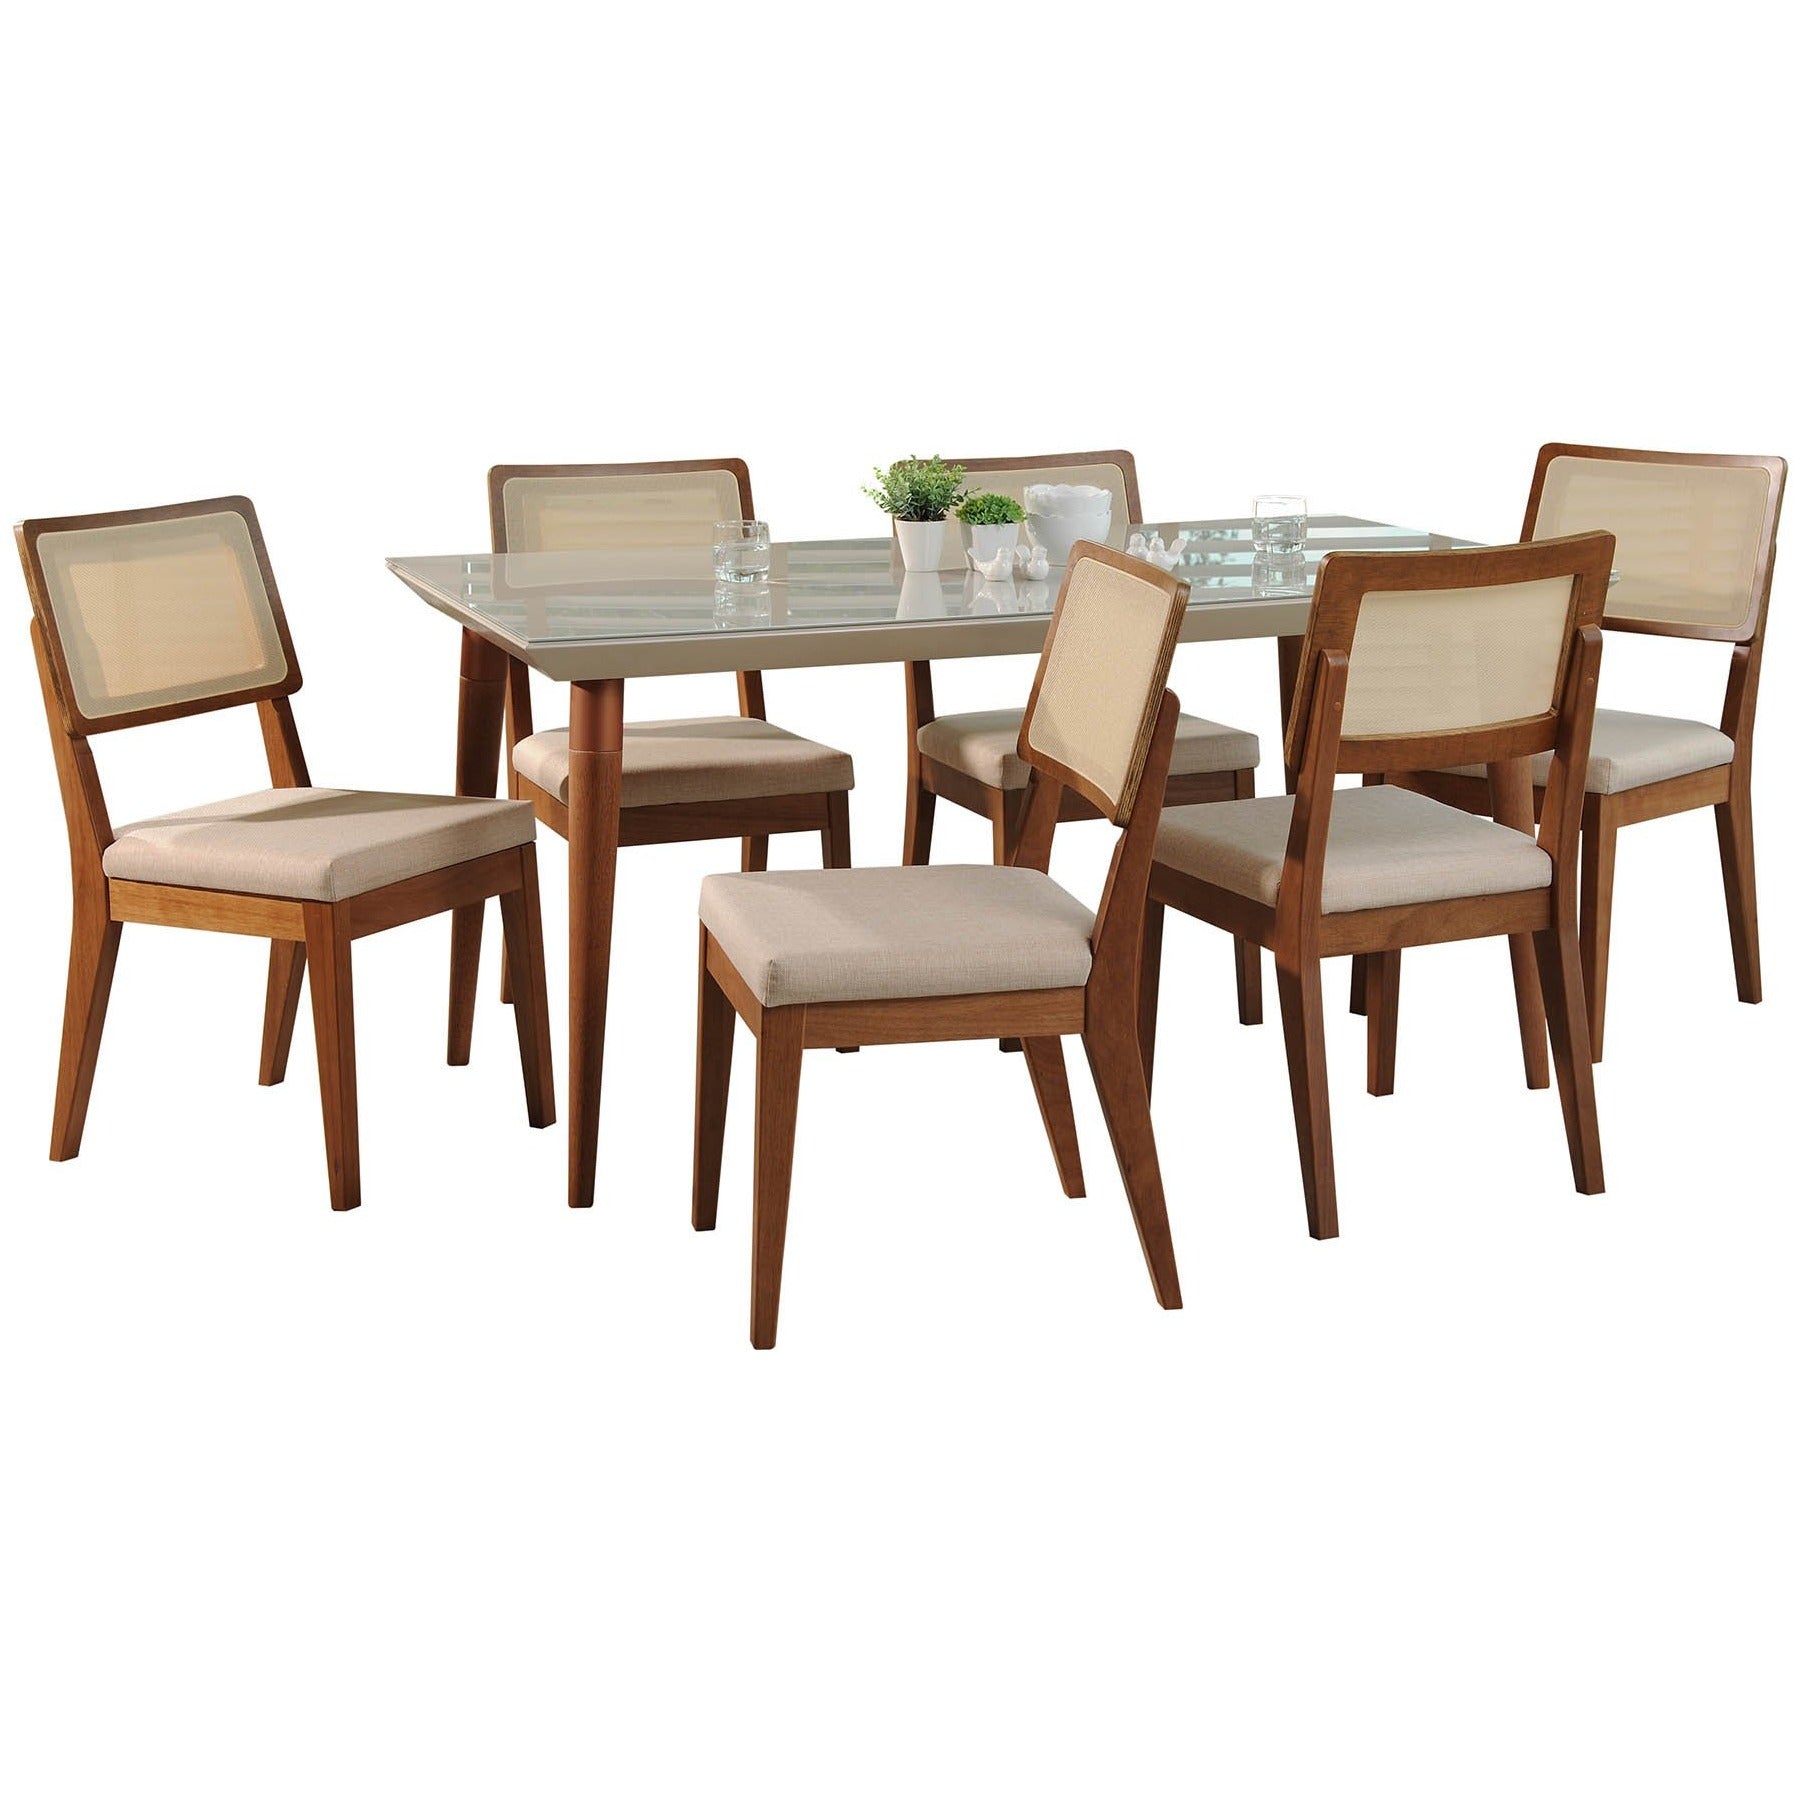 Manhattan Comfort 7-Piece Utopia 70.86" and Pell Dining Set with 6 Dining Chairs in Off White and Dark Beige-Minimal & Modern